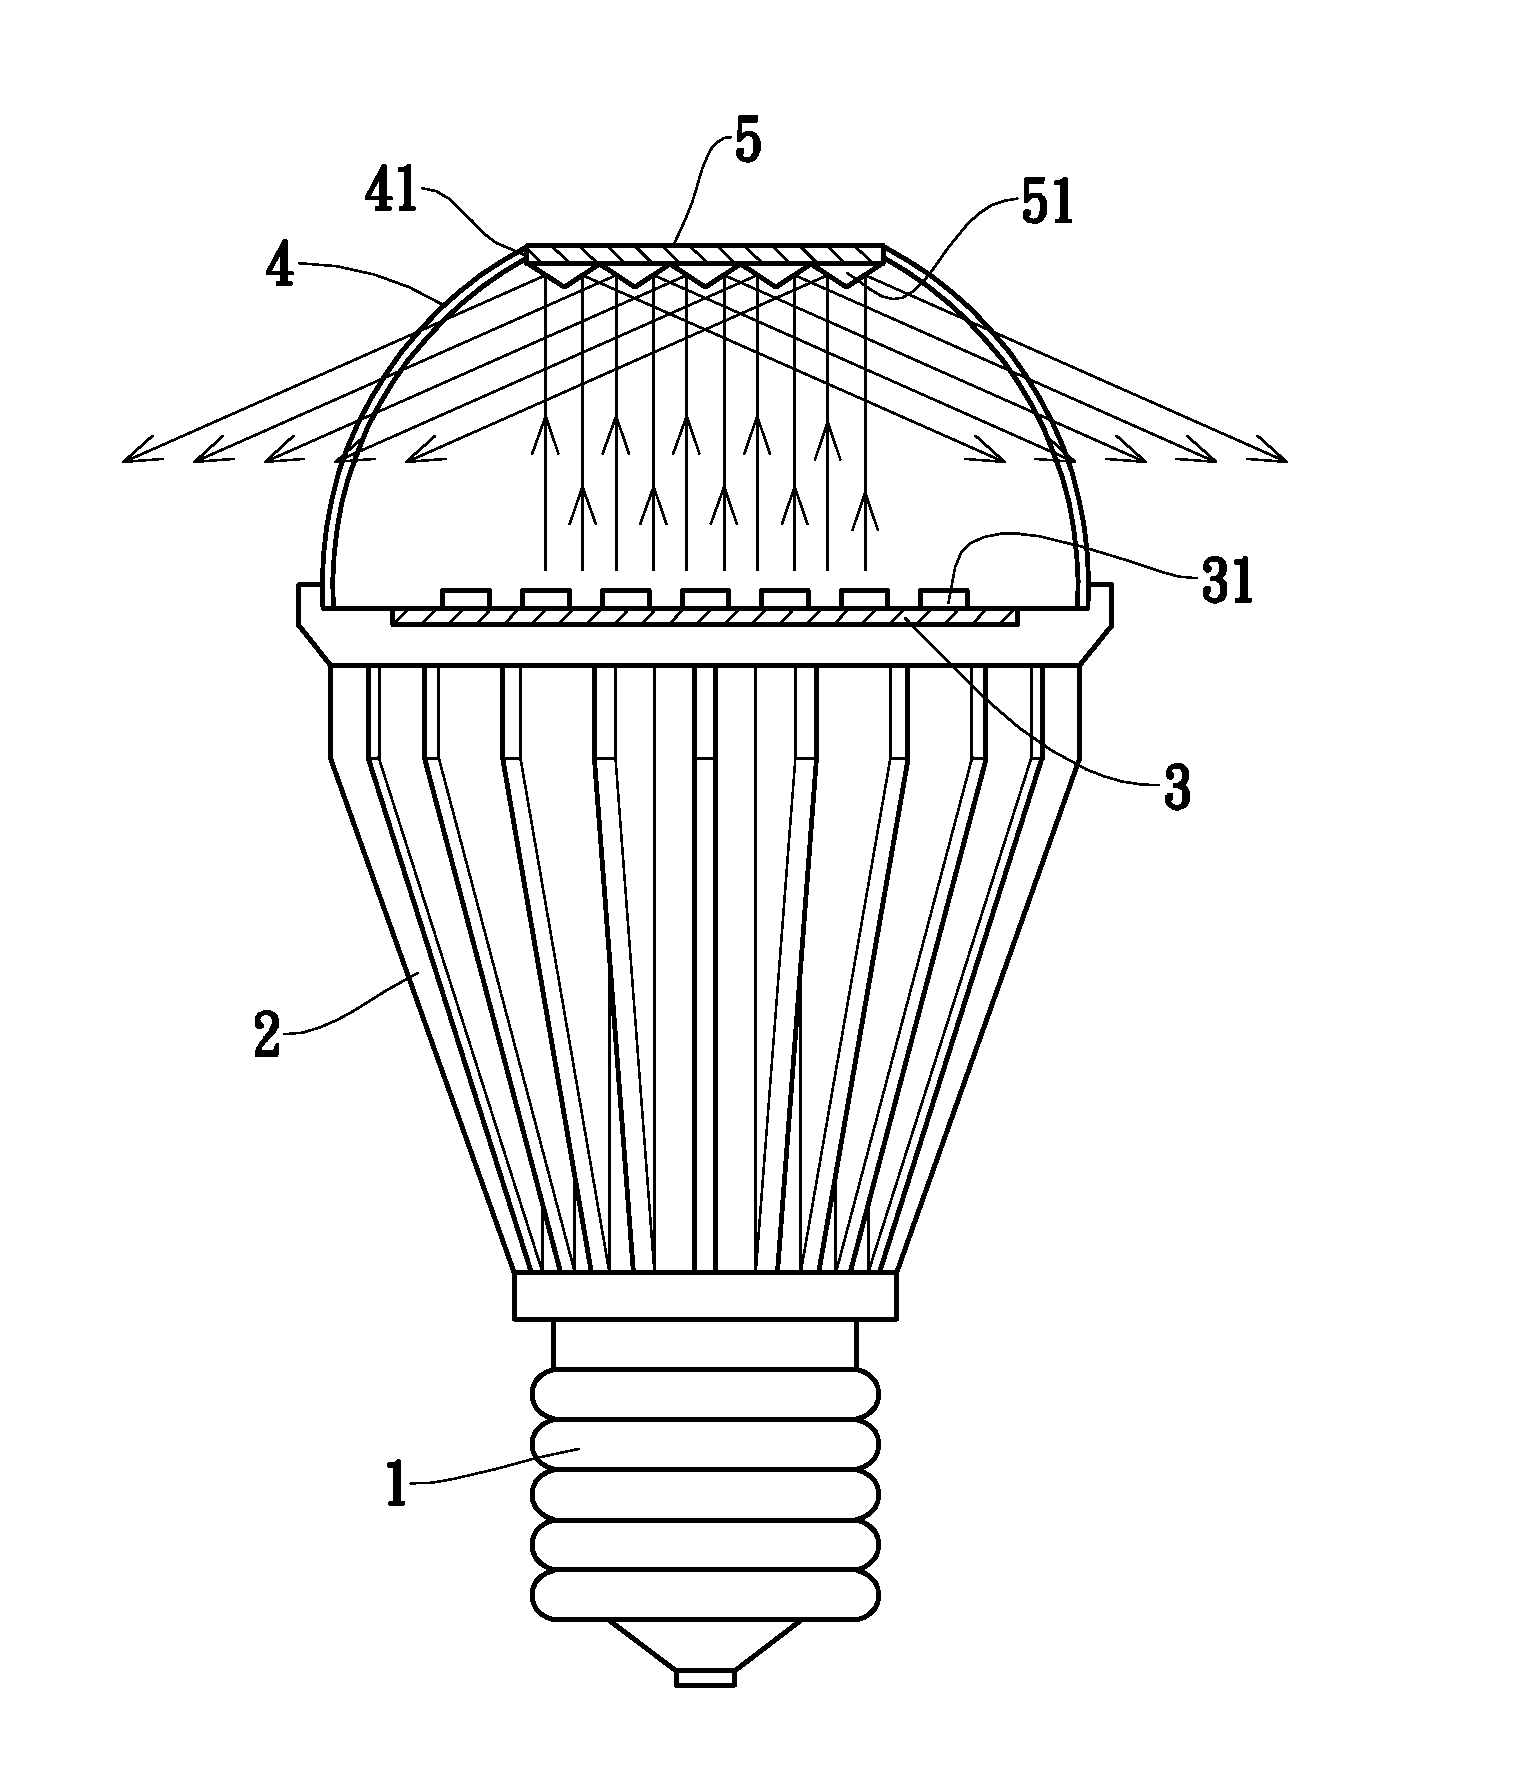 LED (light-emitting diode) lamp with light reflection